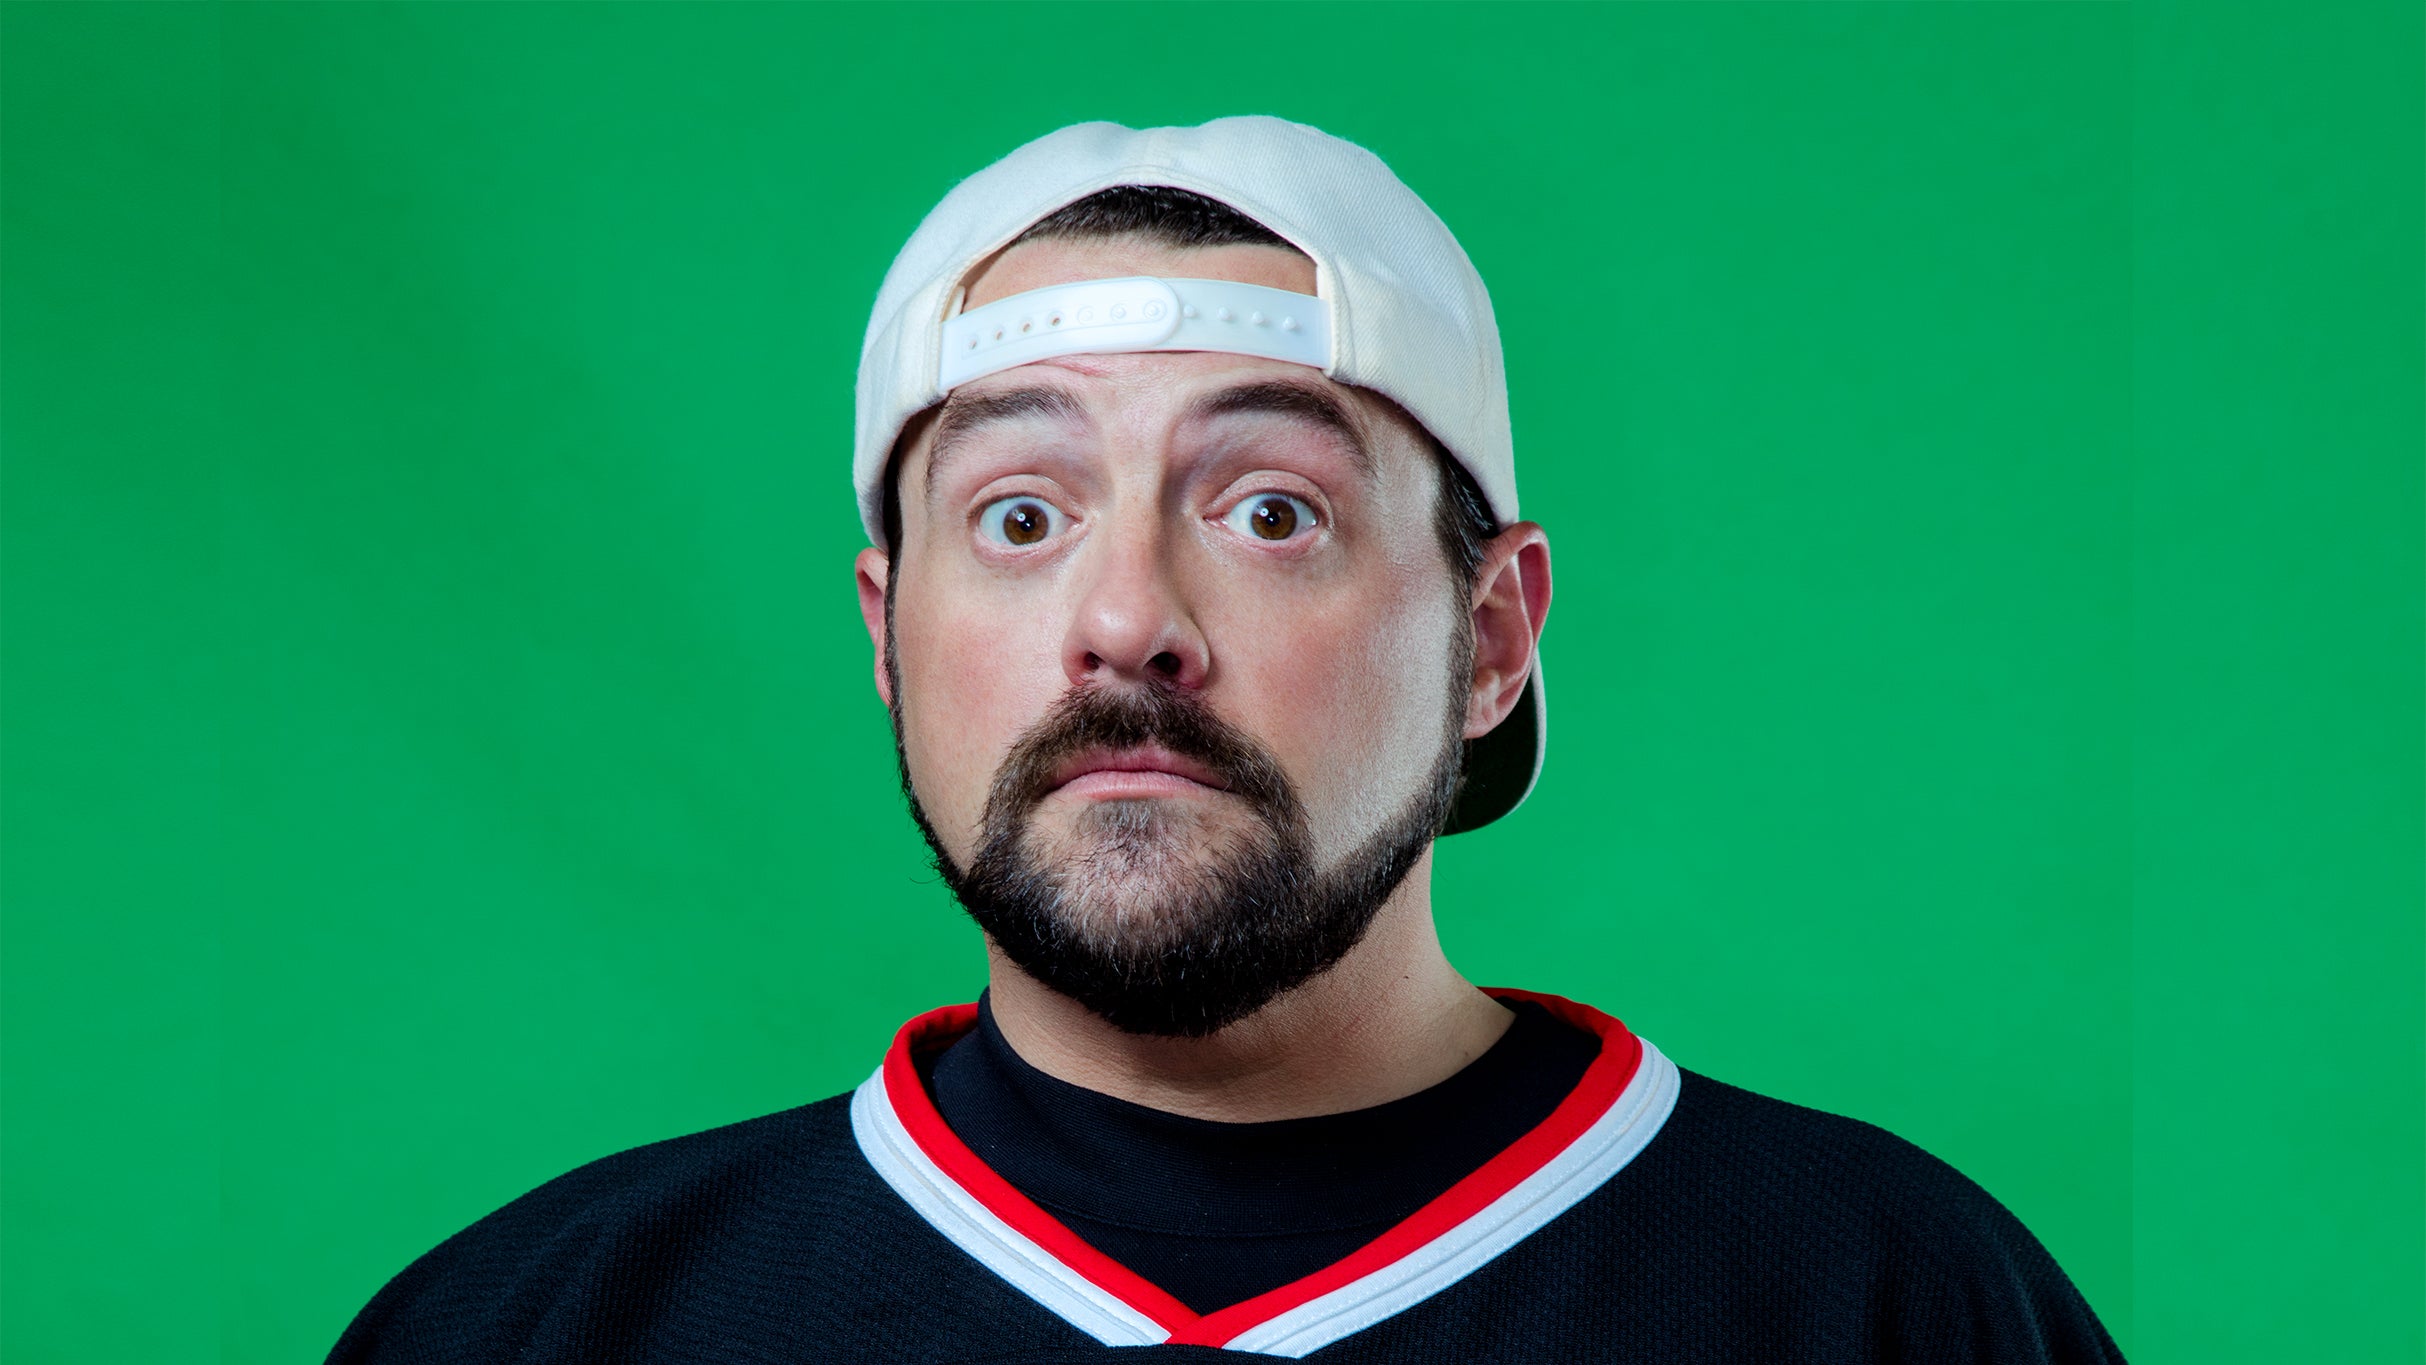 Netflix Is A Joke Presents: Kevin Smith at The Comedy Store